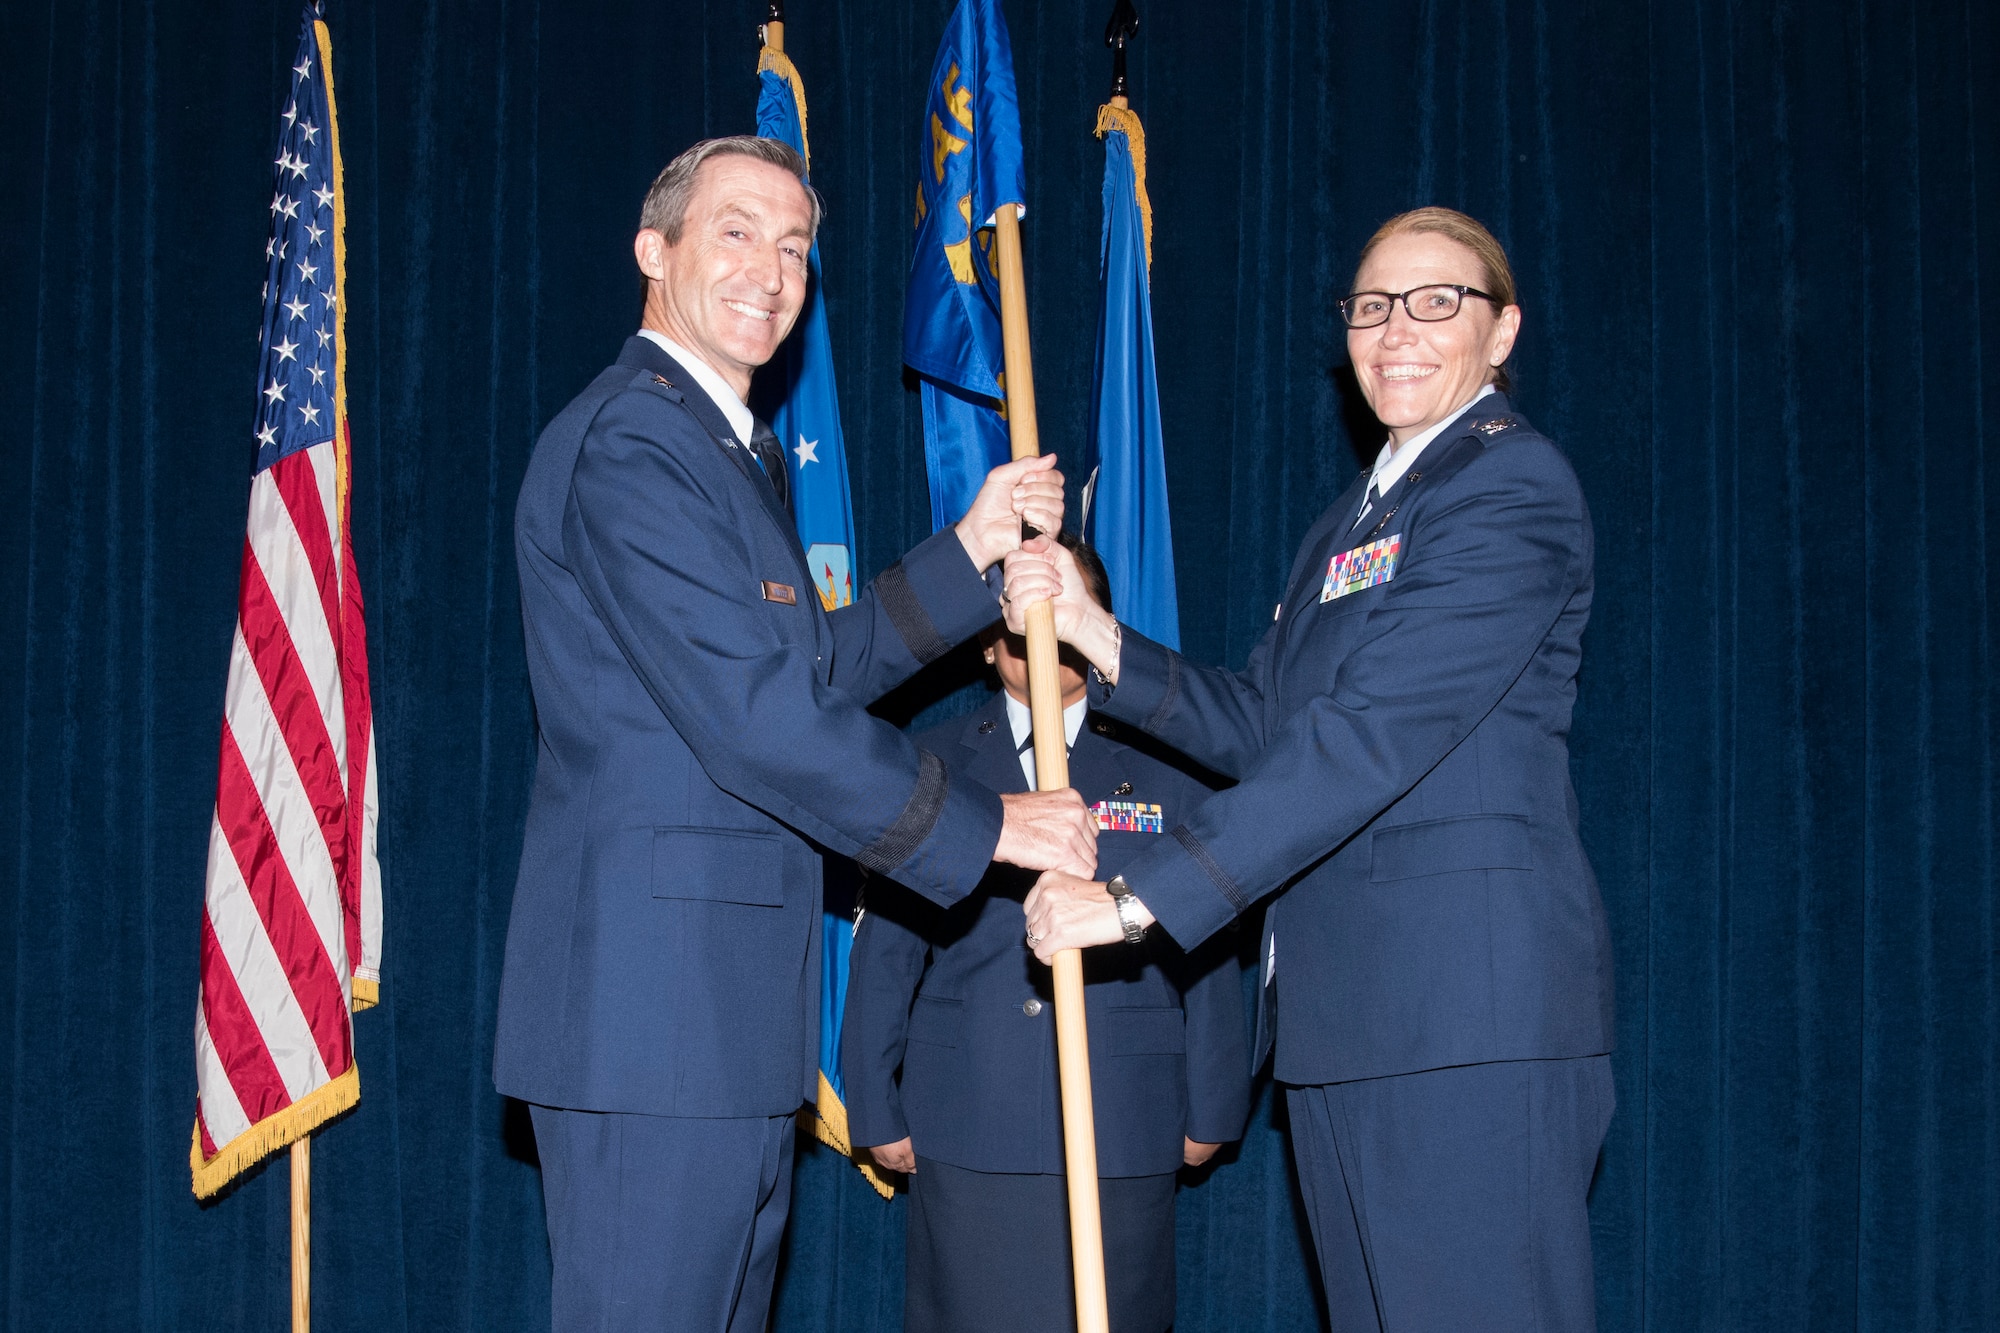 Maj. Gen. Ronald “Bruce” Miller, 10th Air Force commander, passes the guidon to Col. Lori Jones during a ceremony at Joint Base San Antonio-Lackland, Texas, Nov. 18, in which the 960th Cyberspace Wing was activated.